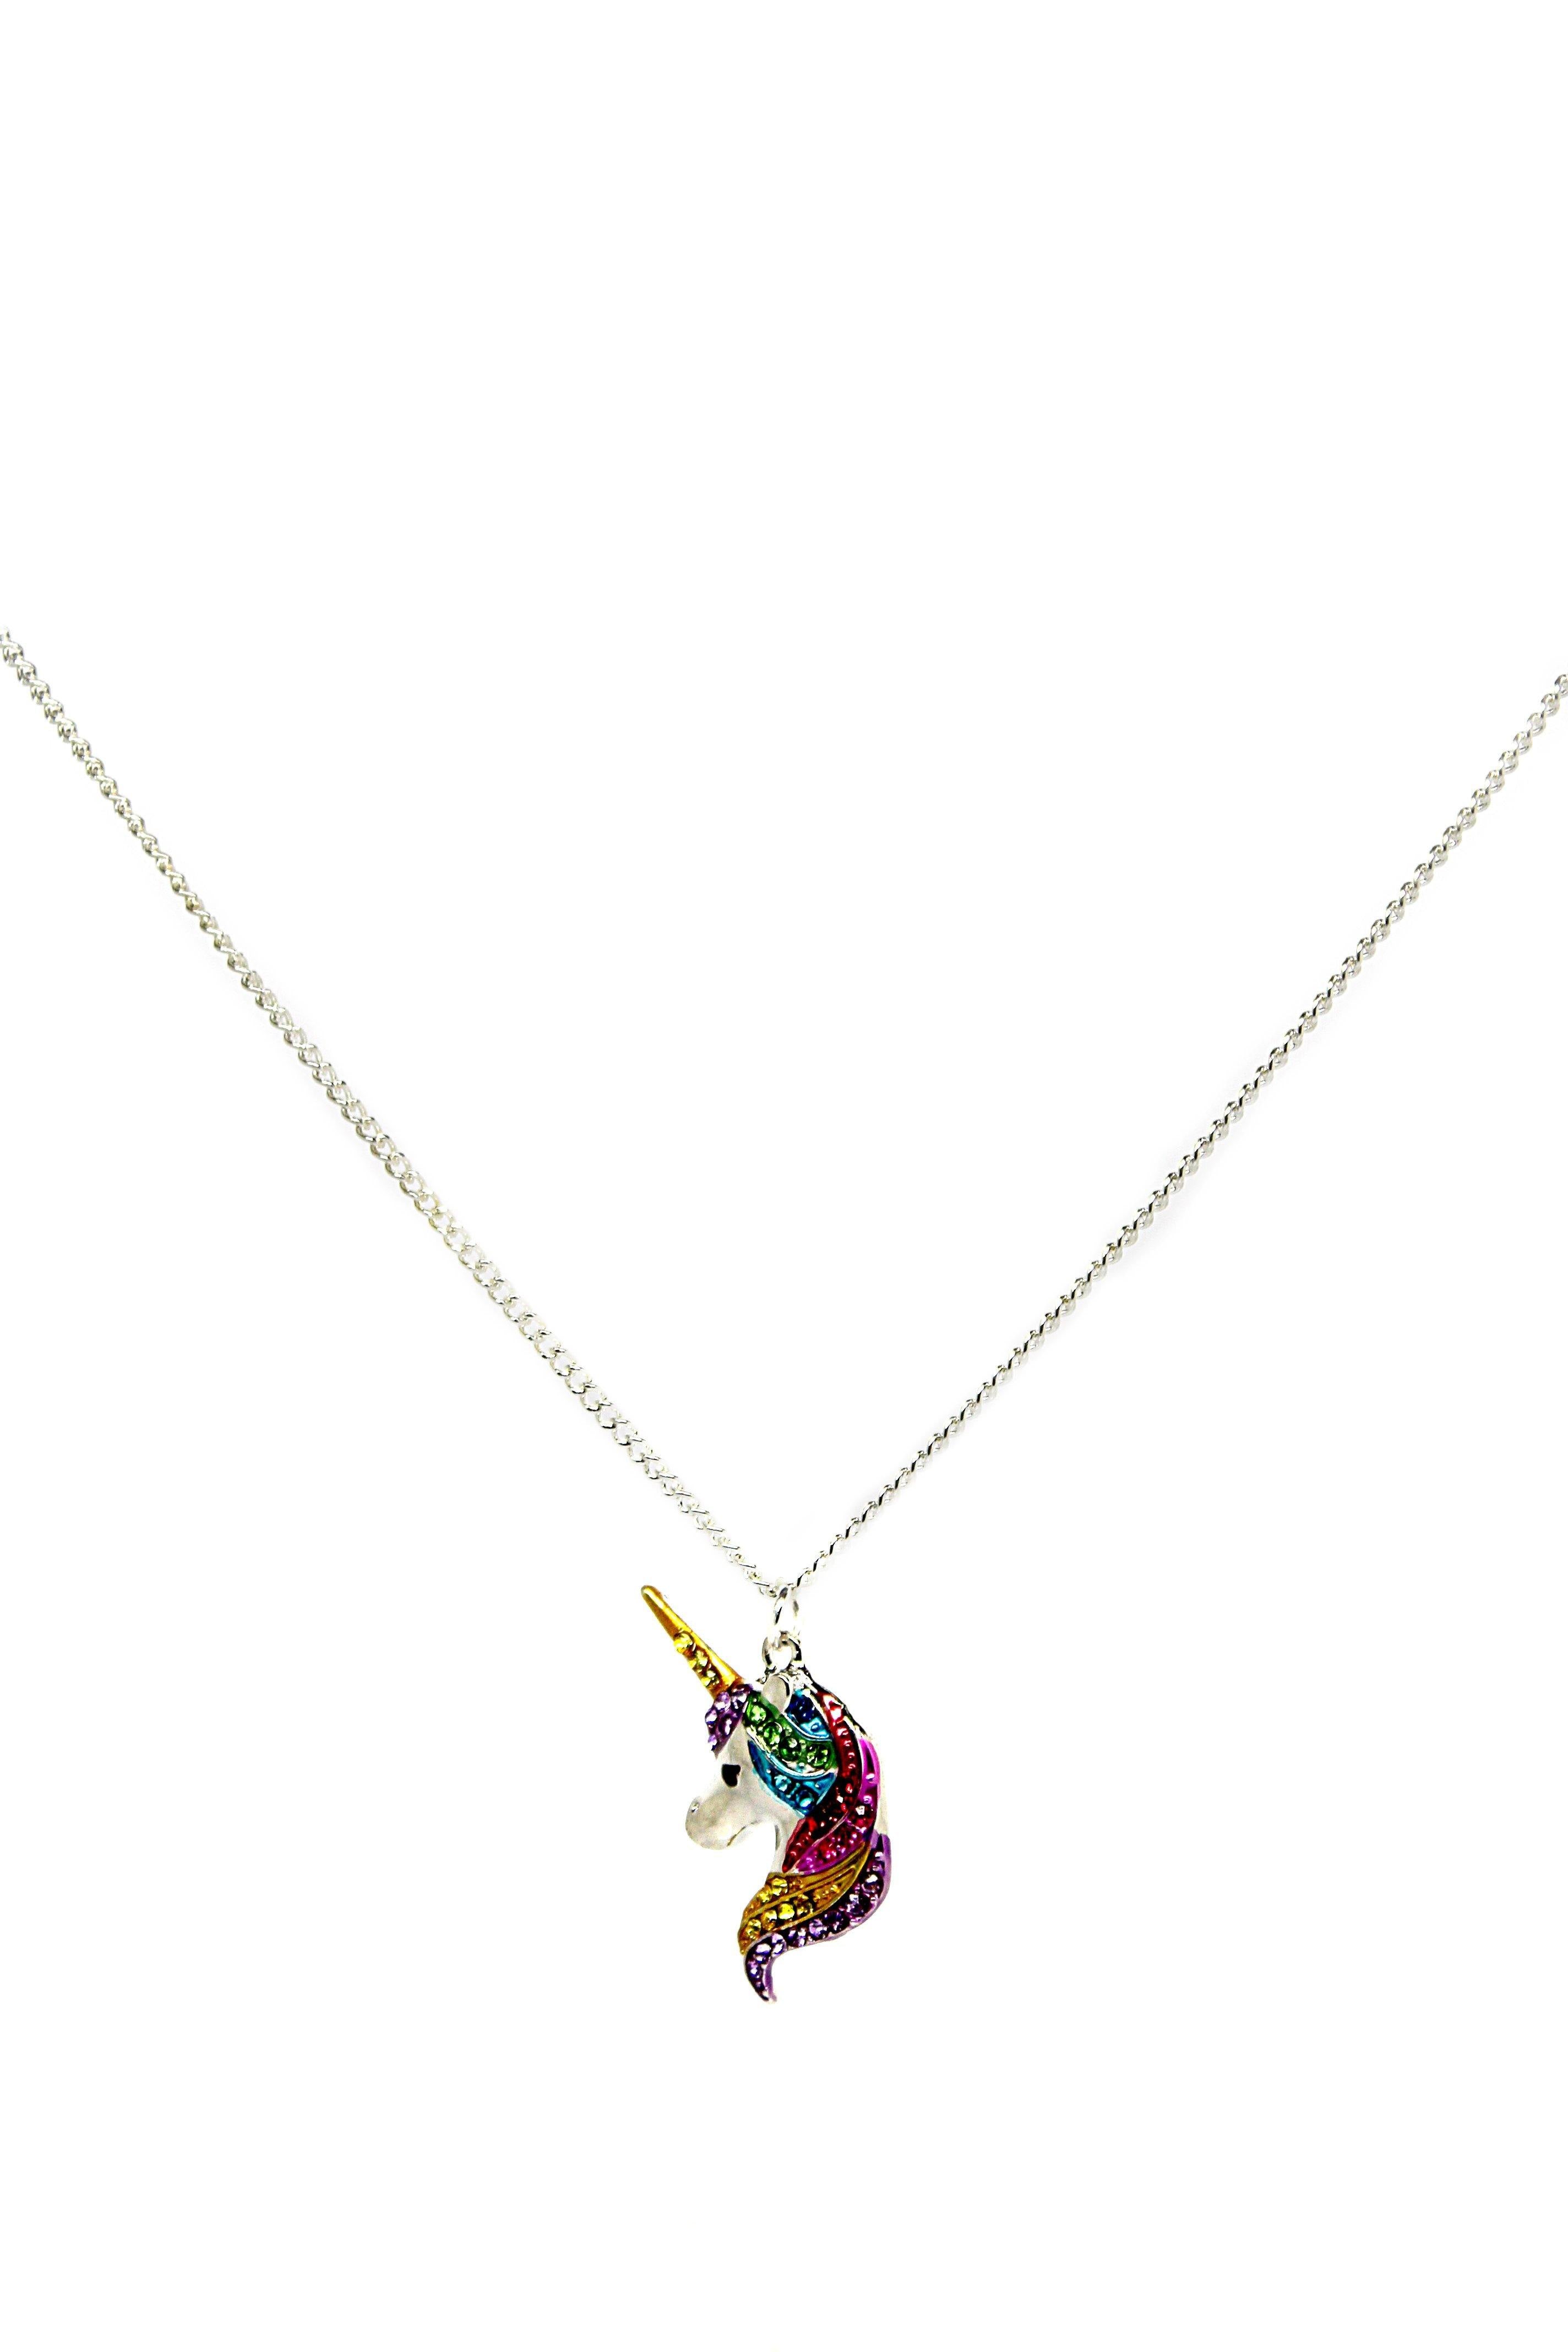 Unicorn Head Necklace - Wildtouch - Wildtouch